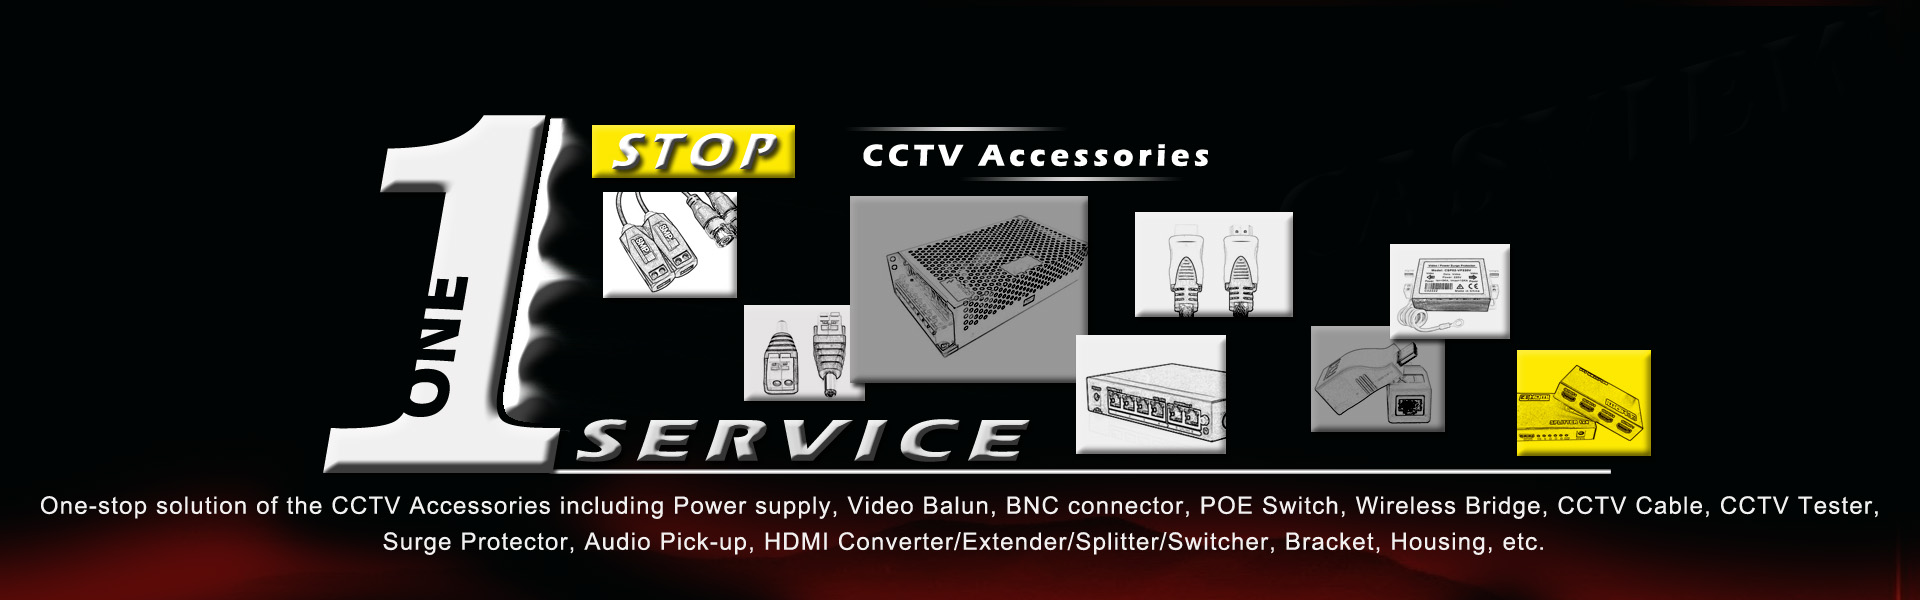 One of the Professional suppliers of CCTV Accessories in china